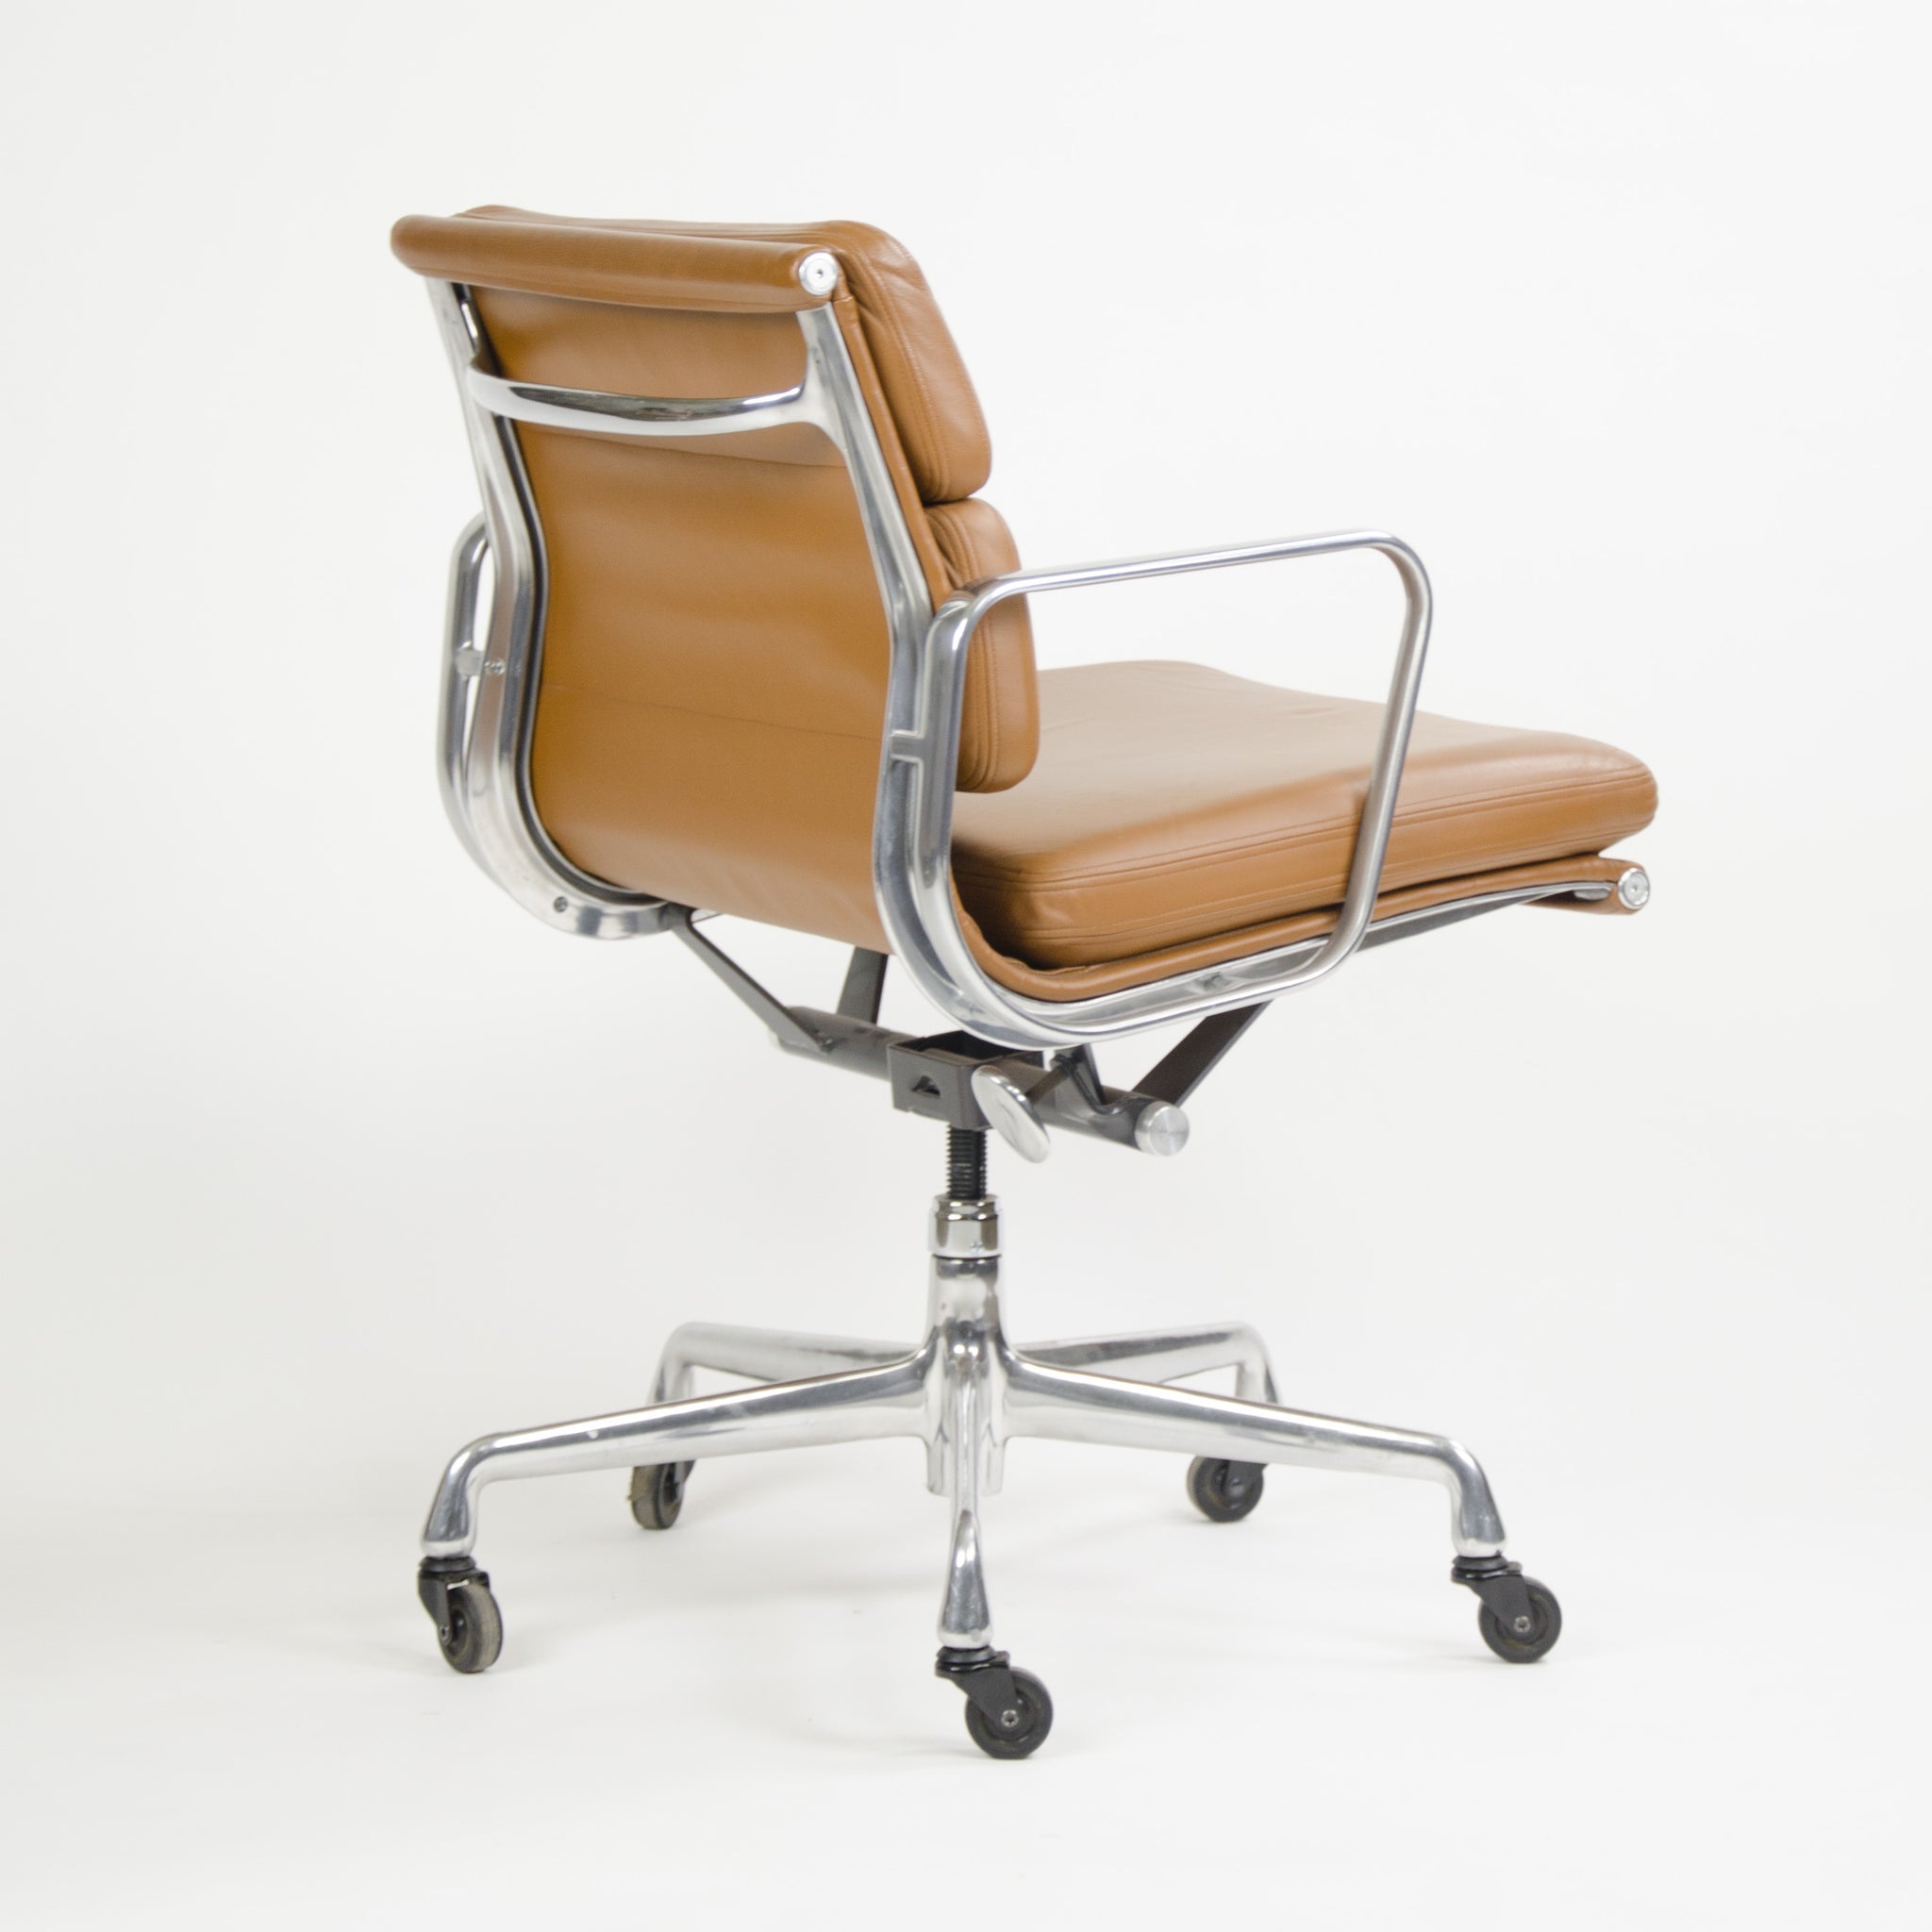 SOLD Herman Miller Eames Soft Pad Aluminum Group Chair Cognac Leather 2007 1x Avail